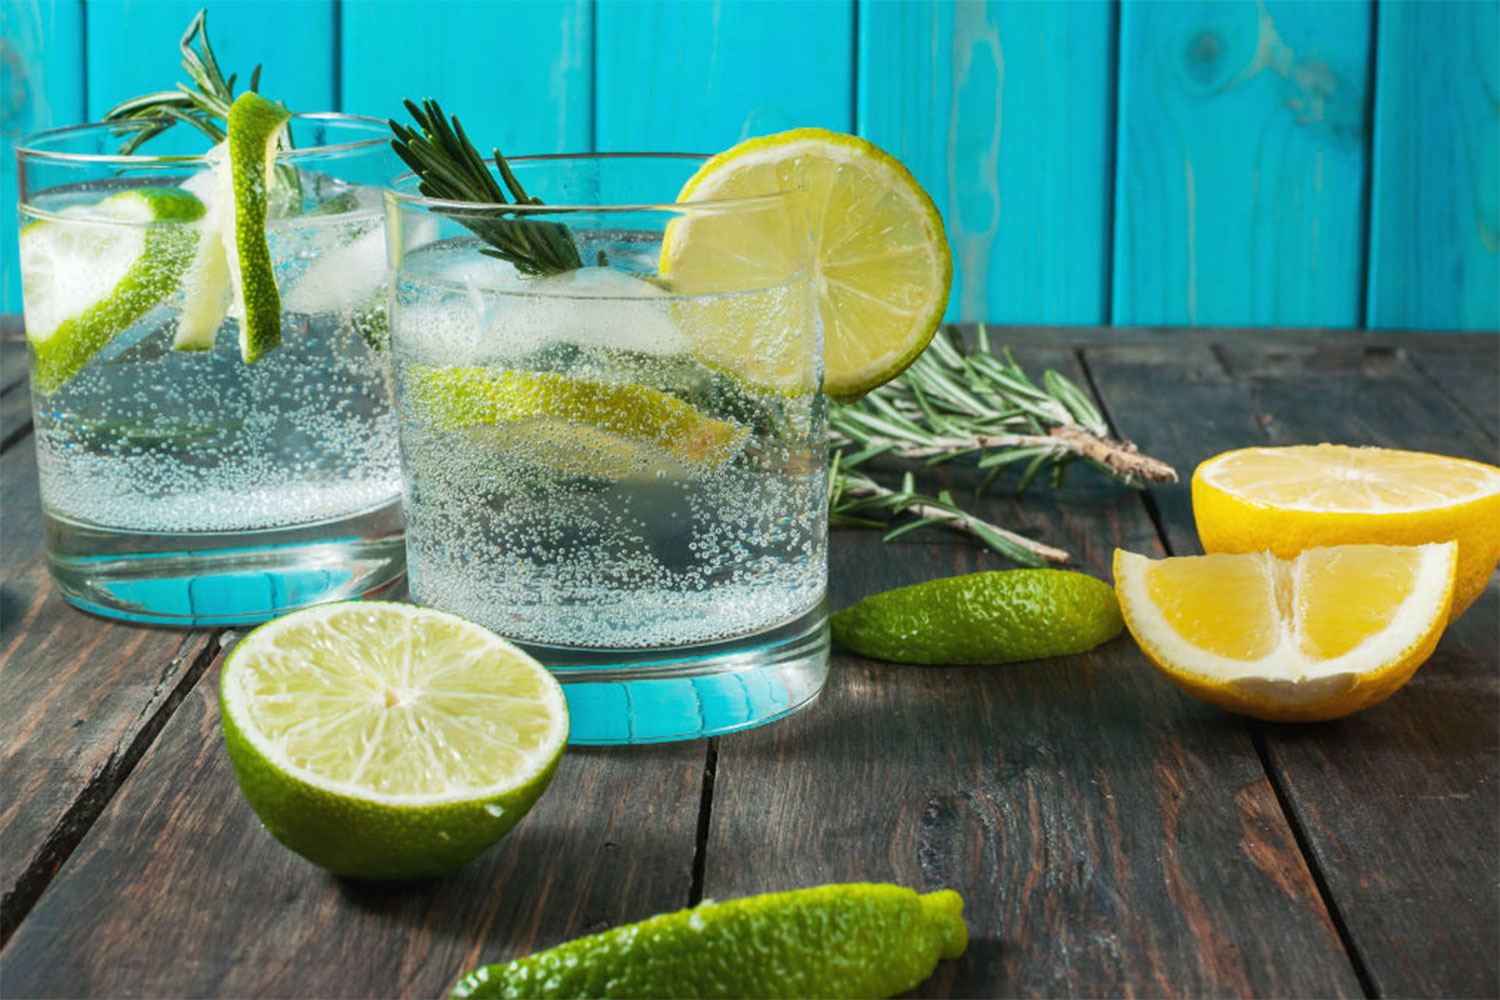 best gin mixers for acid reflux